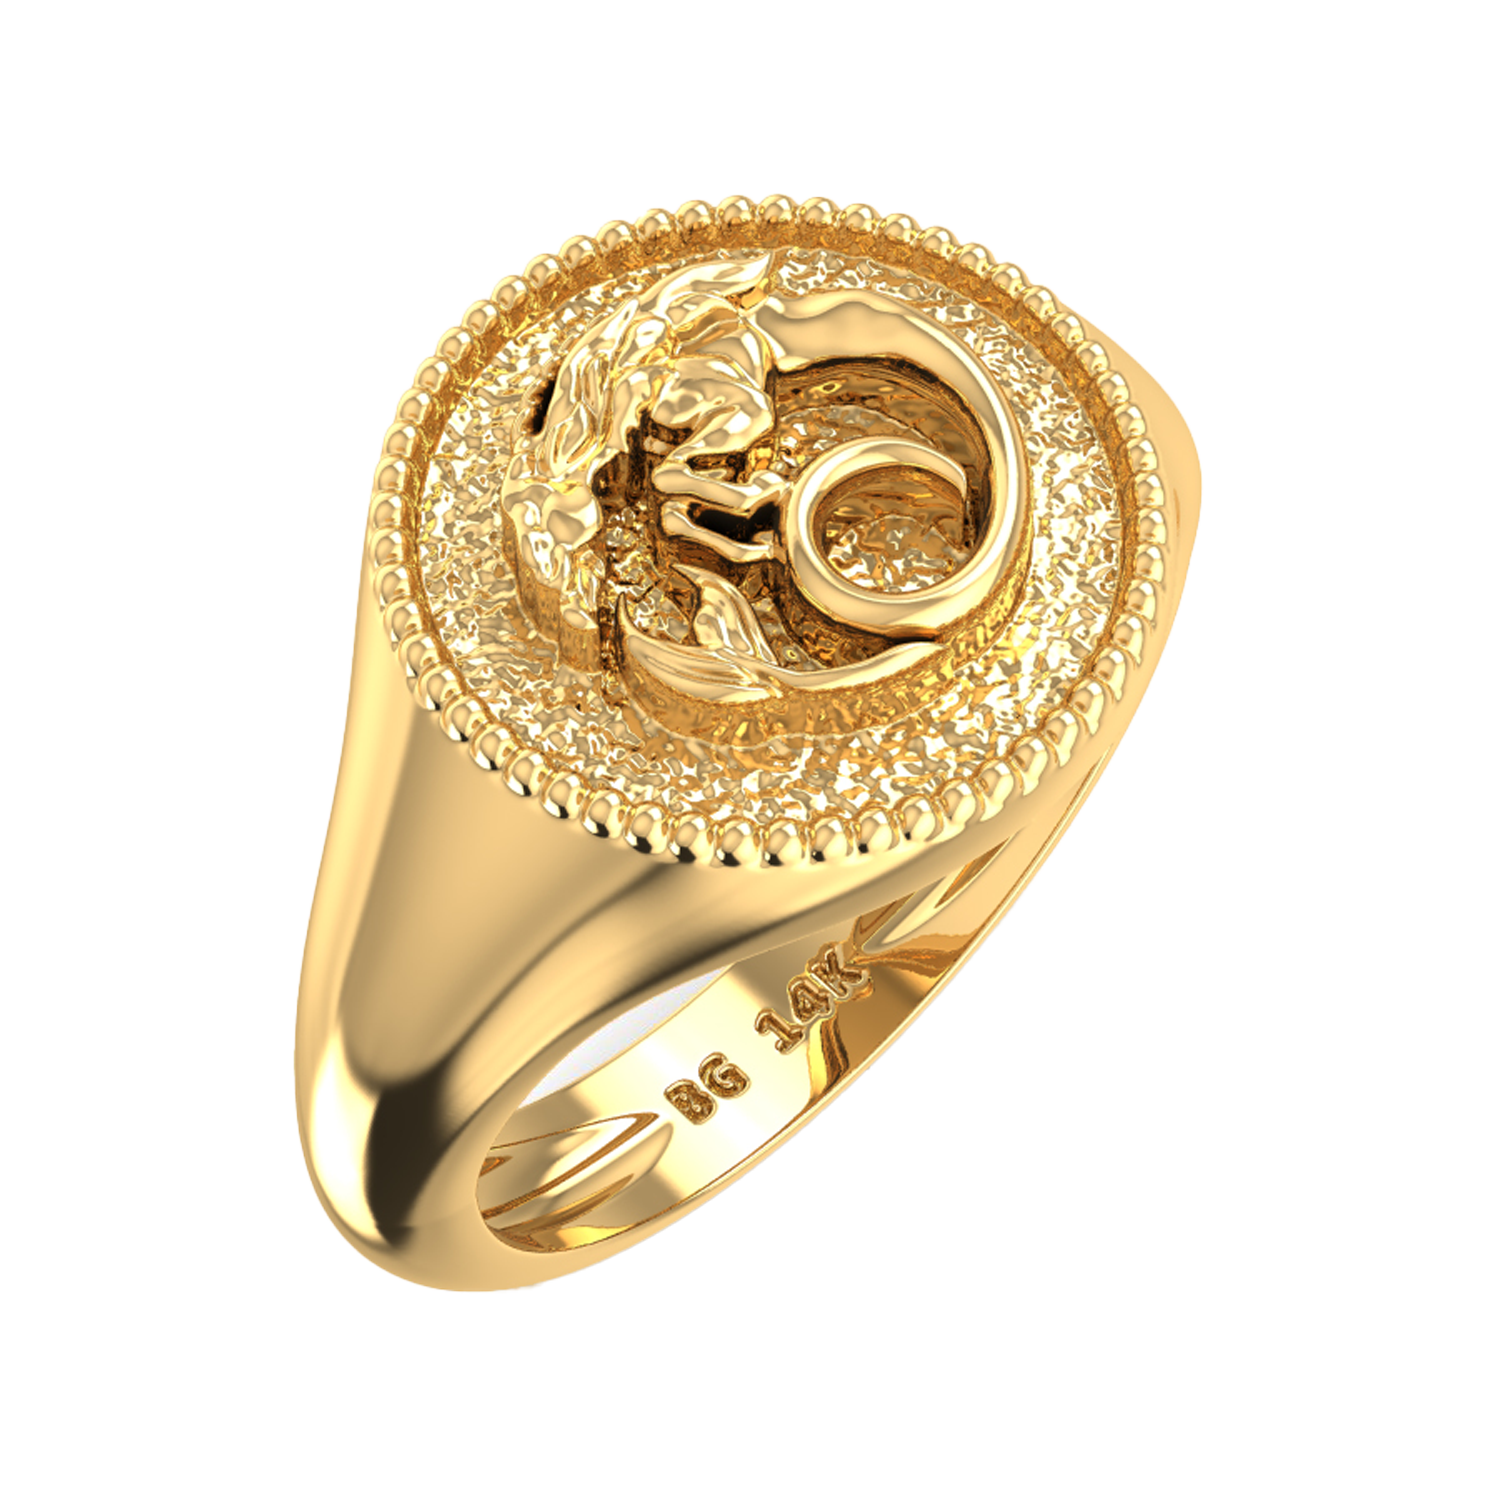 For Sale - 24k Gold Rings | PriceScope